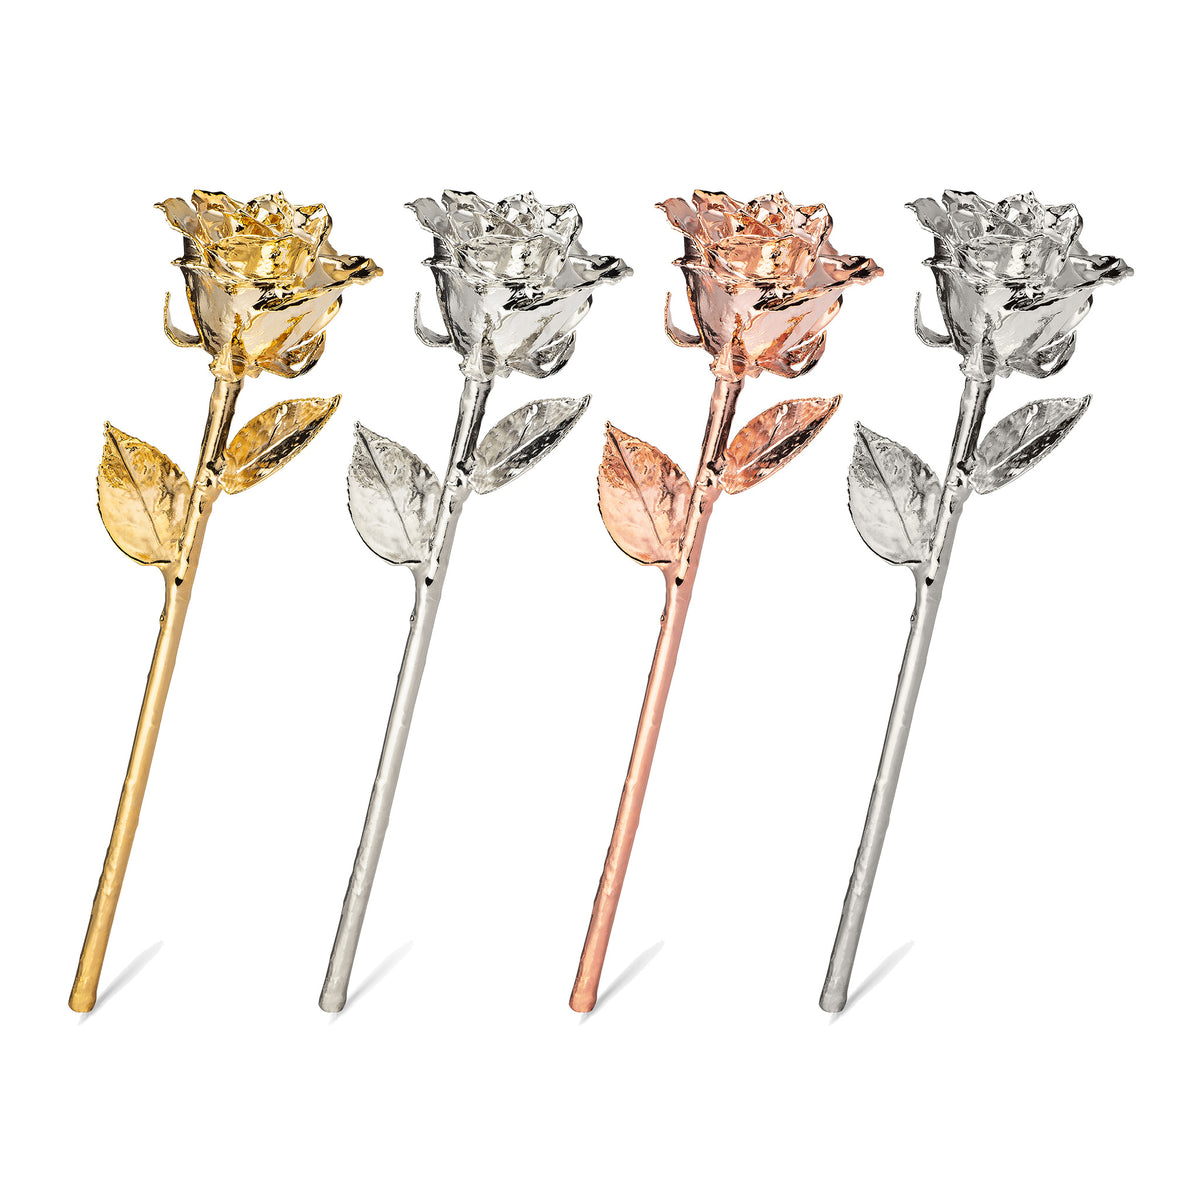 Forever Four Bouquet: Gold, Silver, Rose Gold, Platinum